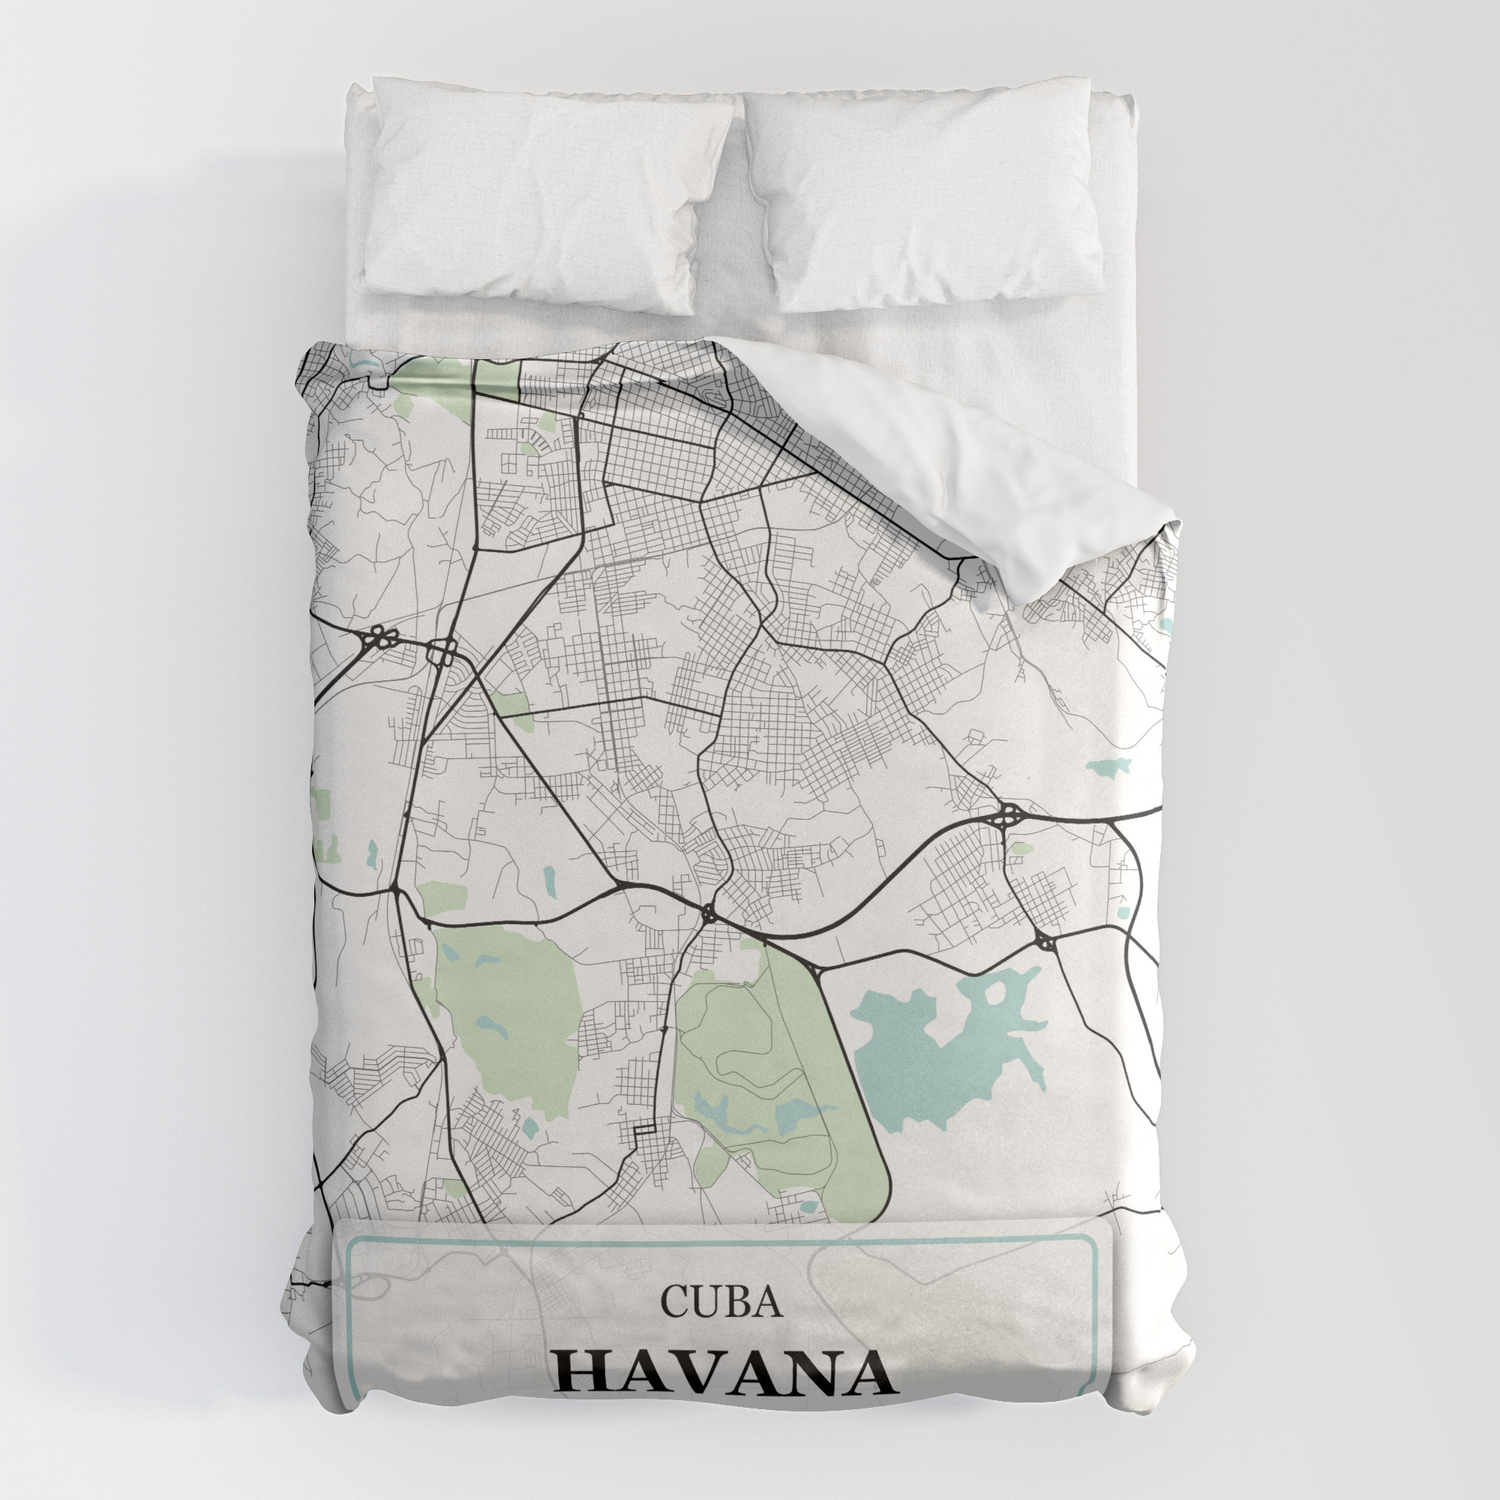 Havana, Cuba City with Coordinates Duvet Cover by danydesign | Society6